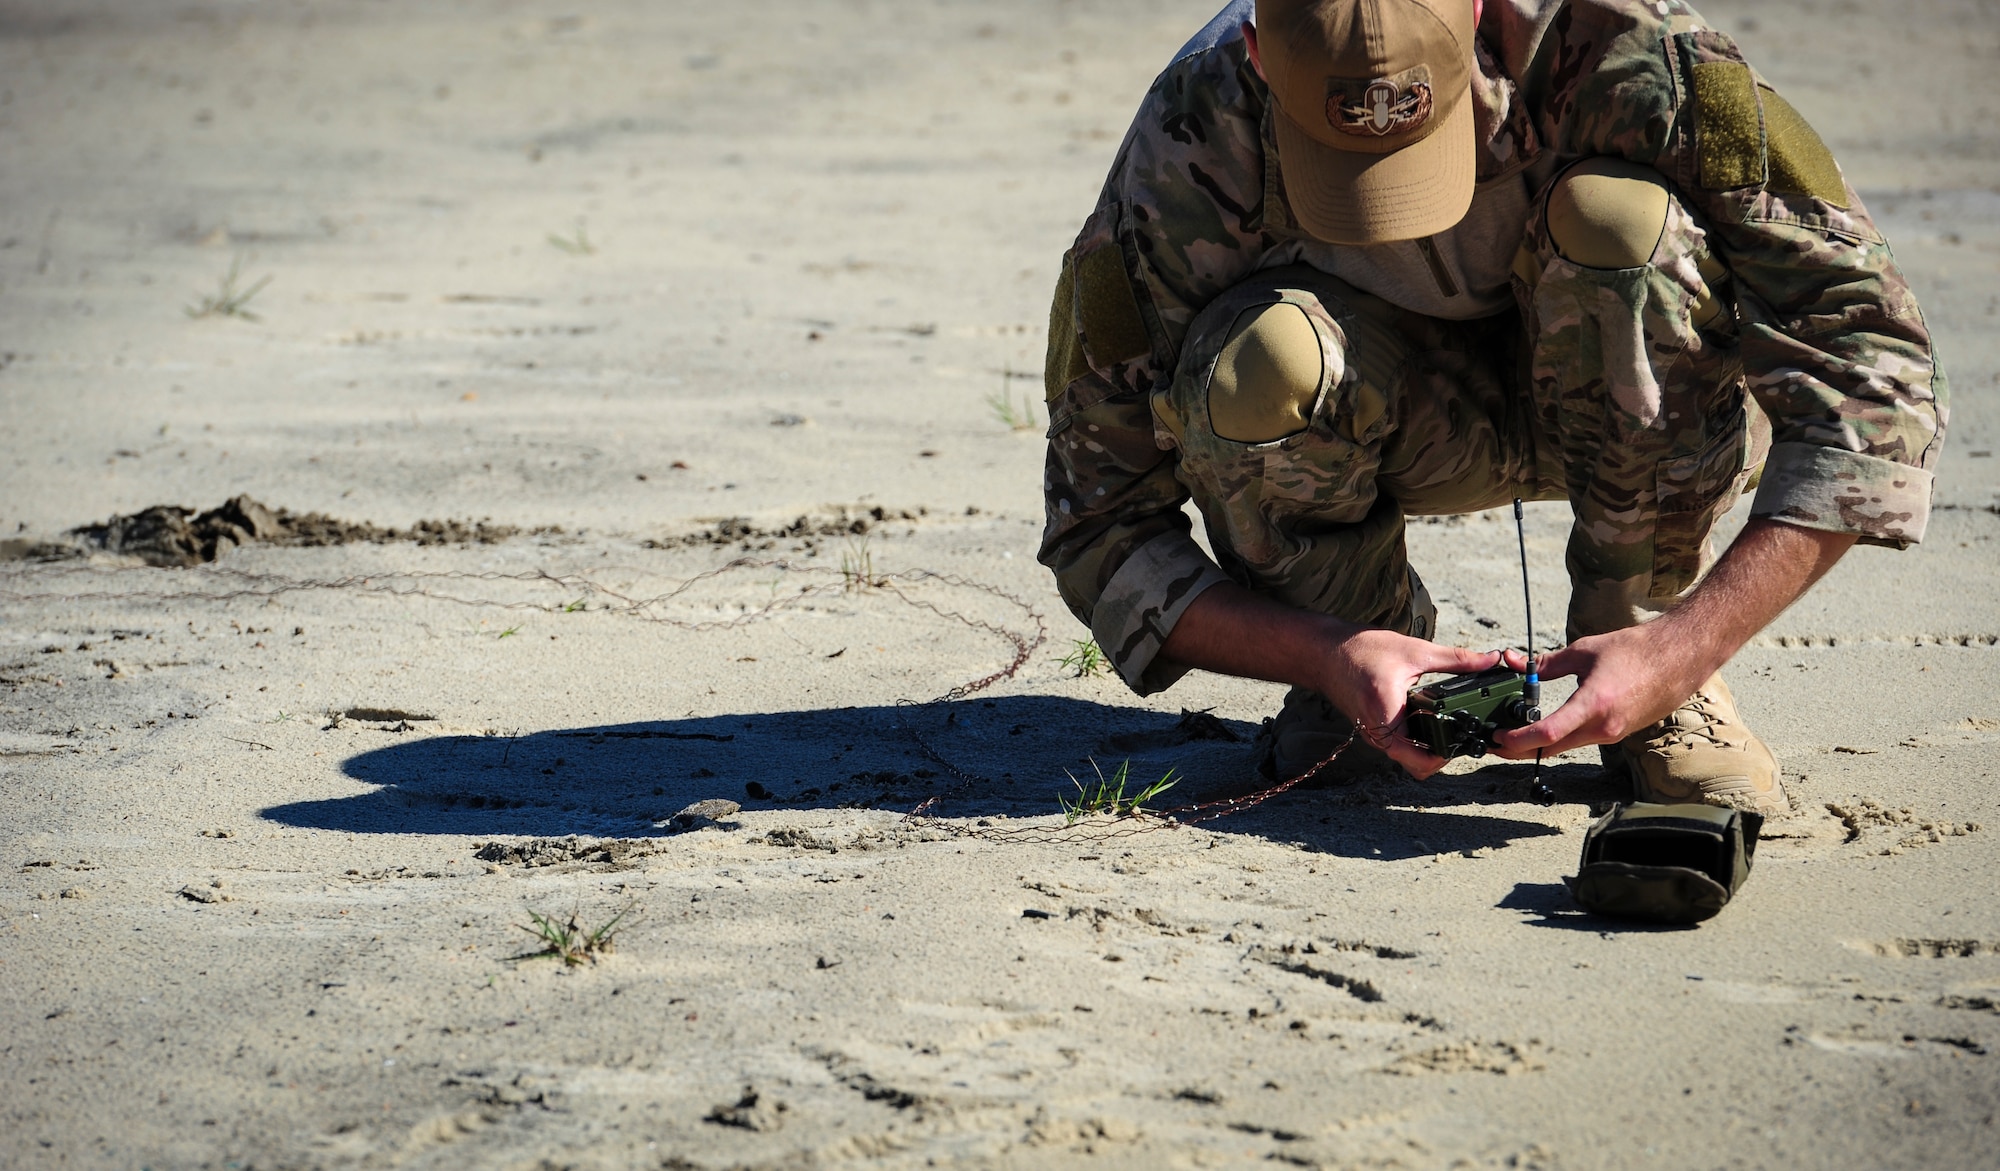 Senior Airman Teddy Compston, an explosive ordnance disposal journeyman with the 1st Special Operations Civil Engineer Squadron, connects blasting wires to a receiver at Hurlburt Field, Fla., Nov. 19, 2015. Wood boxes, plastic containers and backpacks are some items that can be used to make an improvised explosive device, as well as multiple types of batteries. (U.S. Air Force photo by Senior Airman Meagan Schutter)